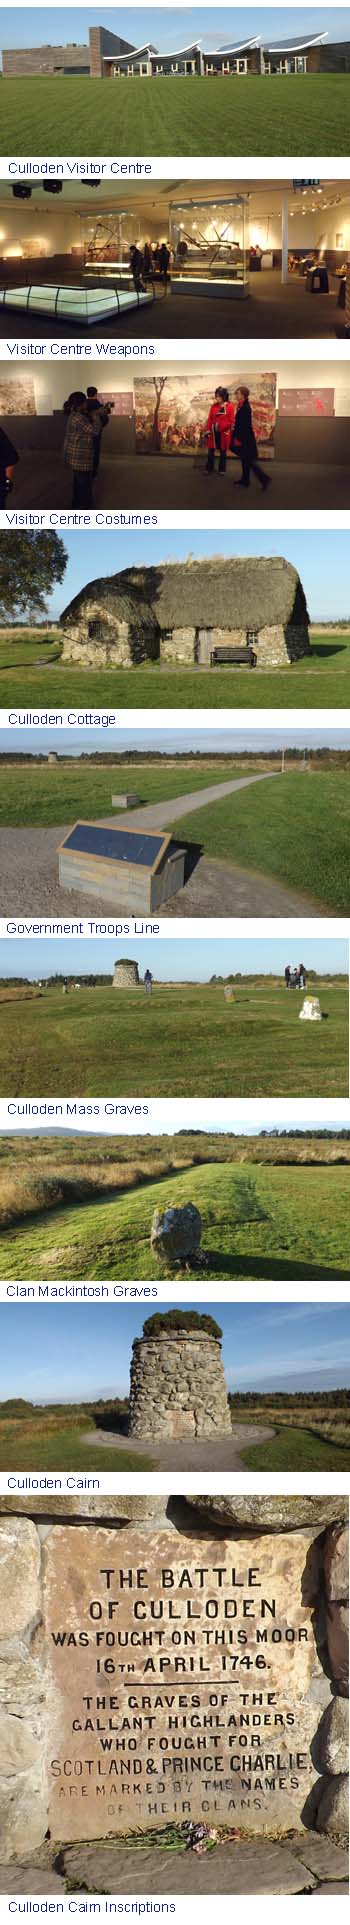 Culloden Images